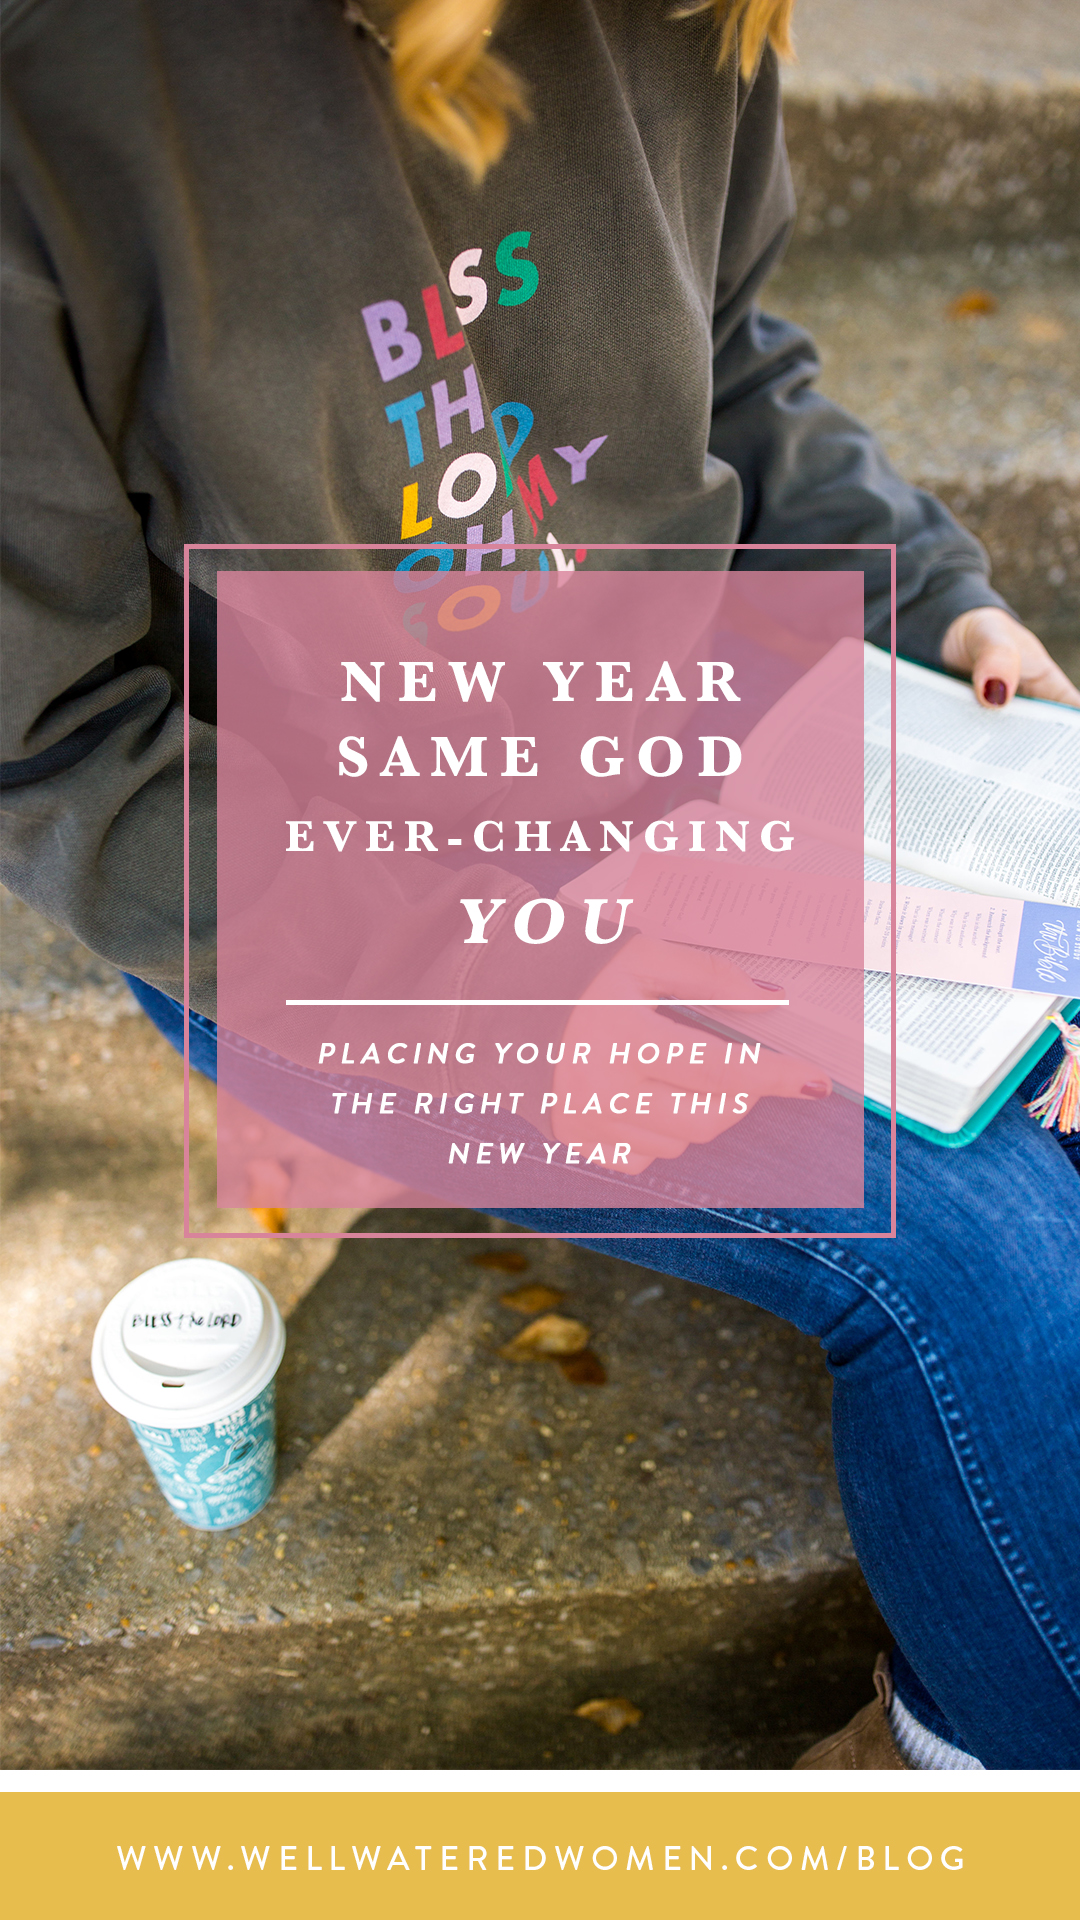 How to place your hope in the right place in 2019 - New Year, SAME GOD, Ever-changing You